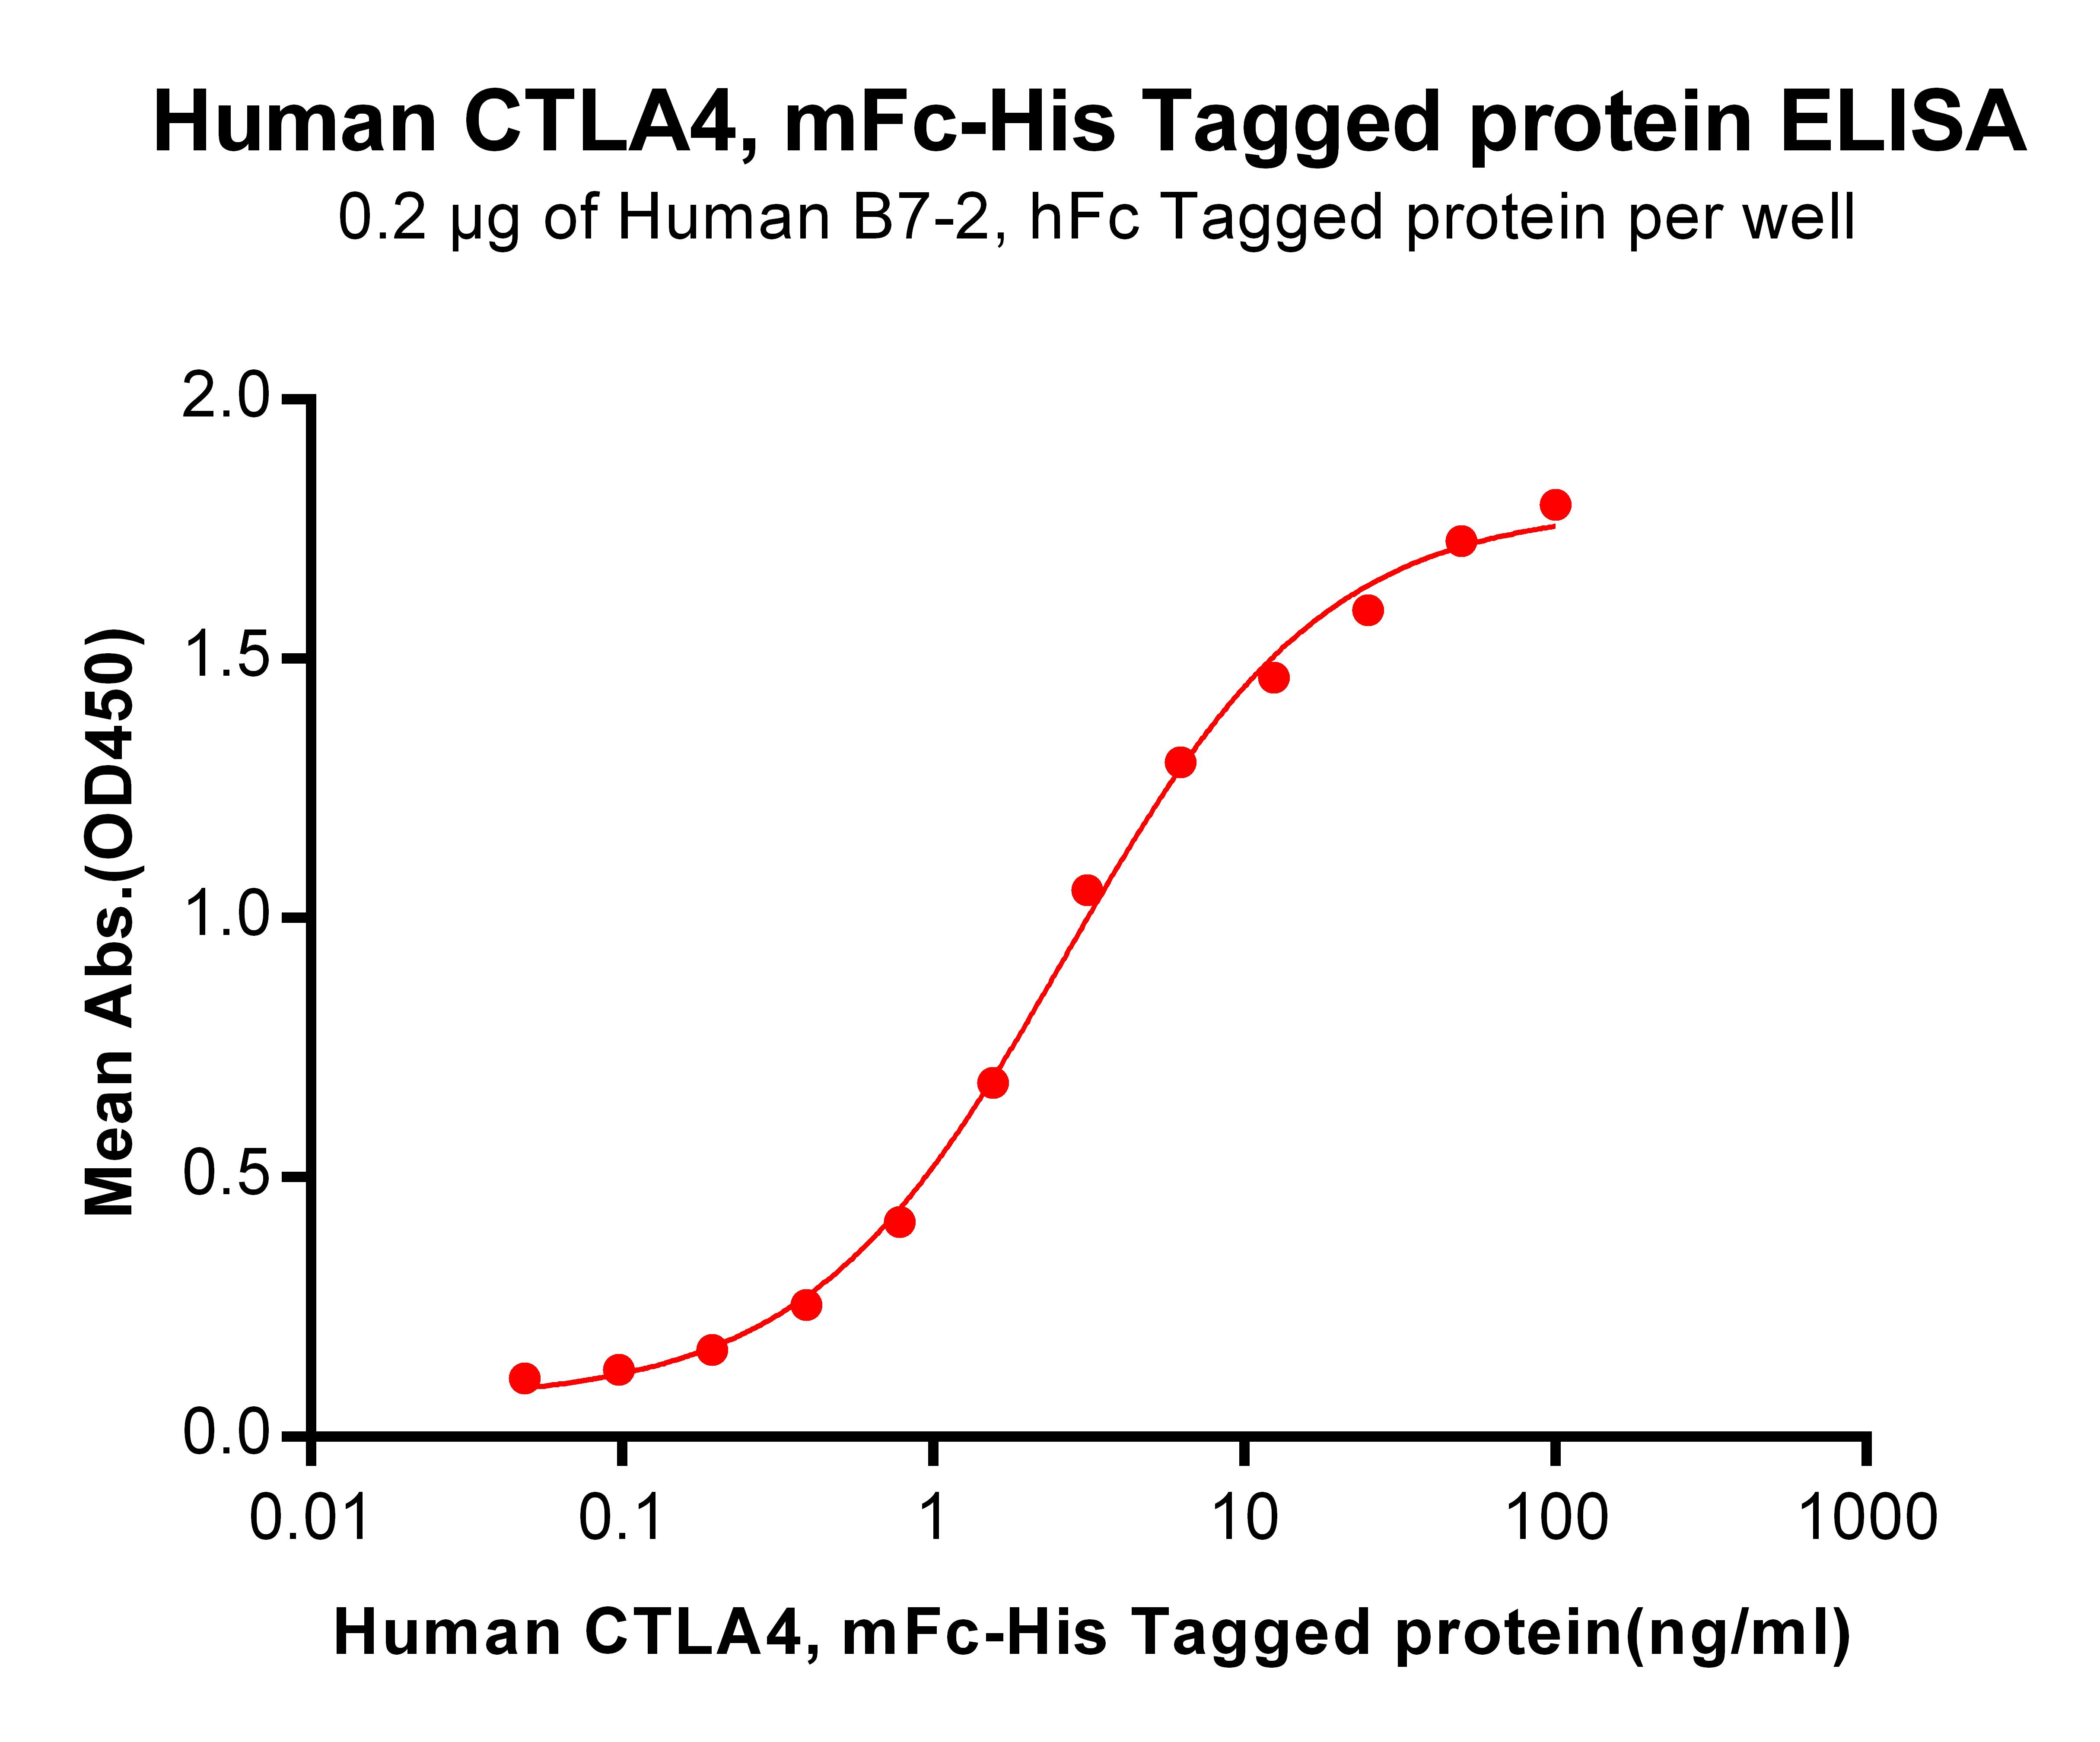 Figure 3. ELISA plate pre-coated by 2 µg/ml (100 µl/well) Human B7-2, hFc tagged protein  can bind Human CTLA4, mFc-His tagged protein  in a linear range of 0.048-2.694 ng/ml.